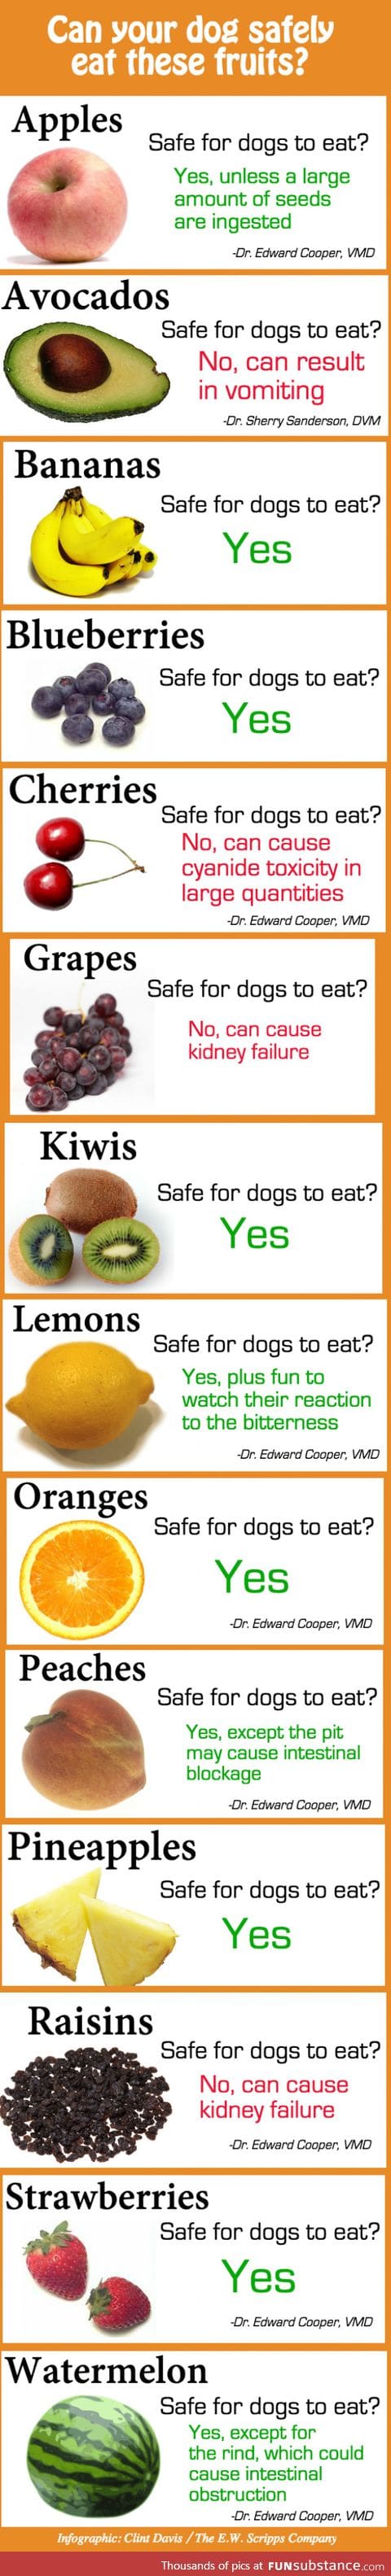 Which fruits can a dog eat?